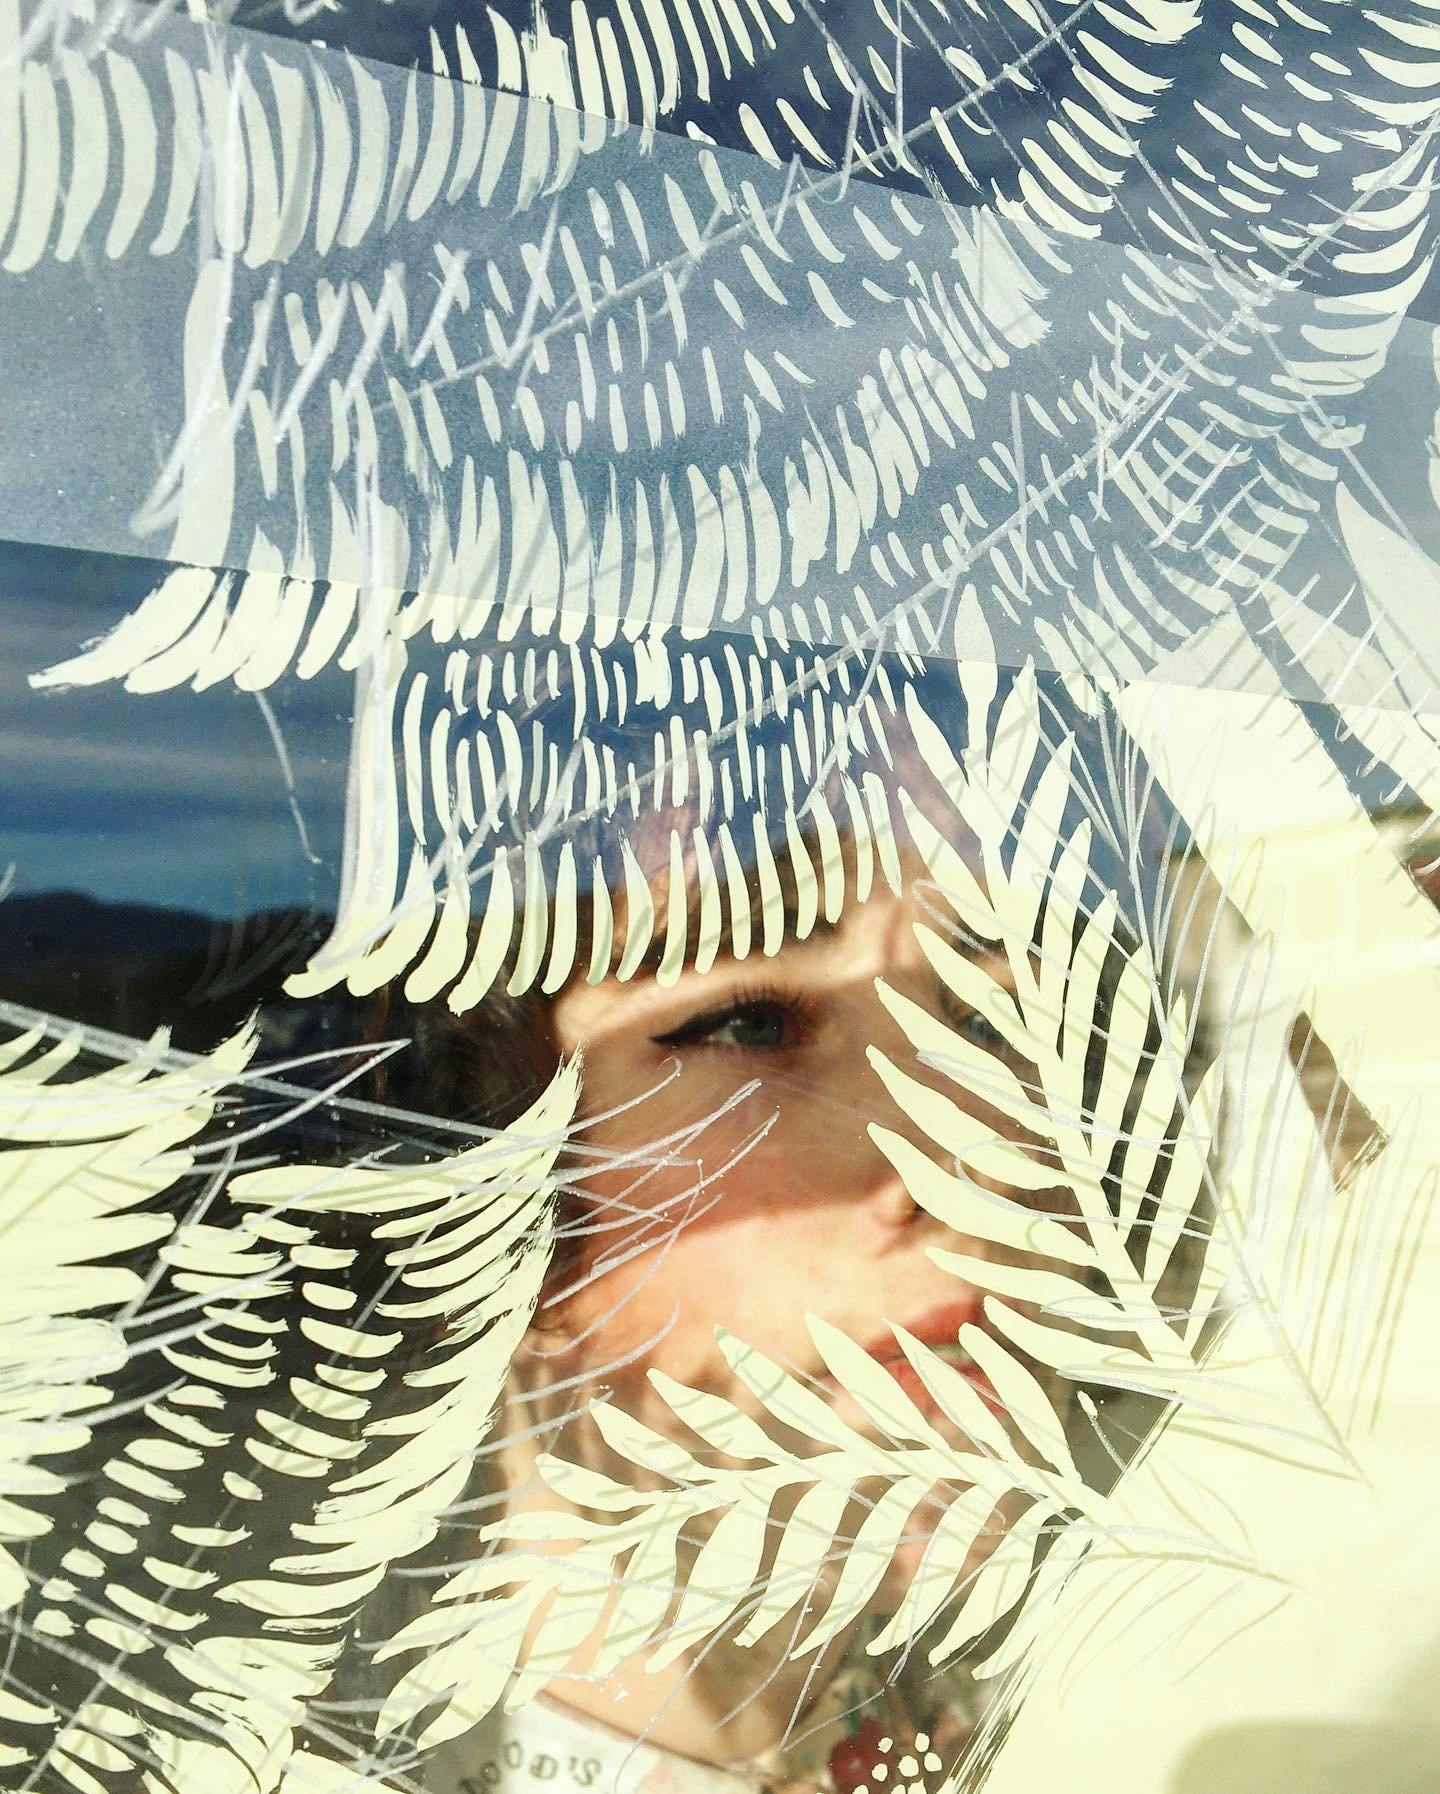 Portrait of Margot Reverdy painting leaves on a window.